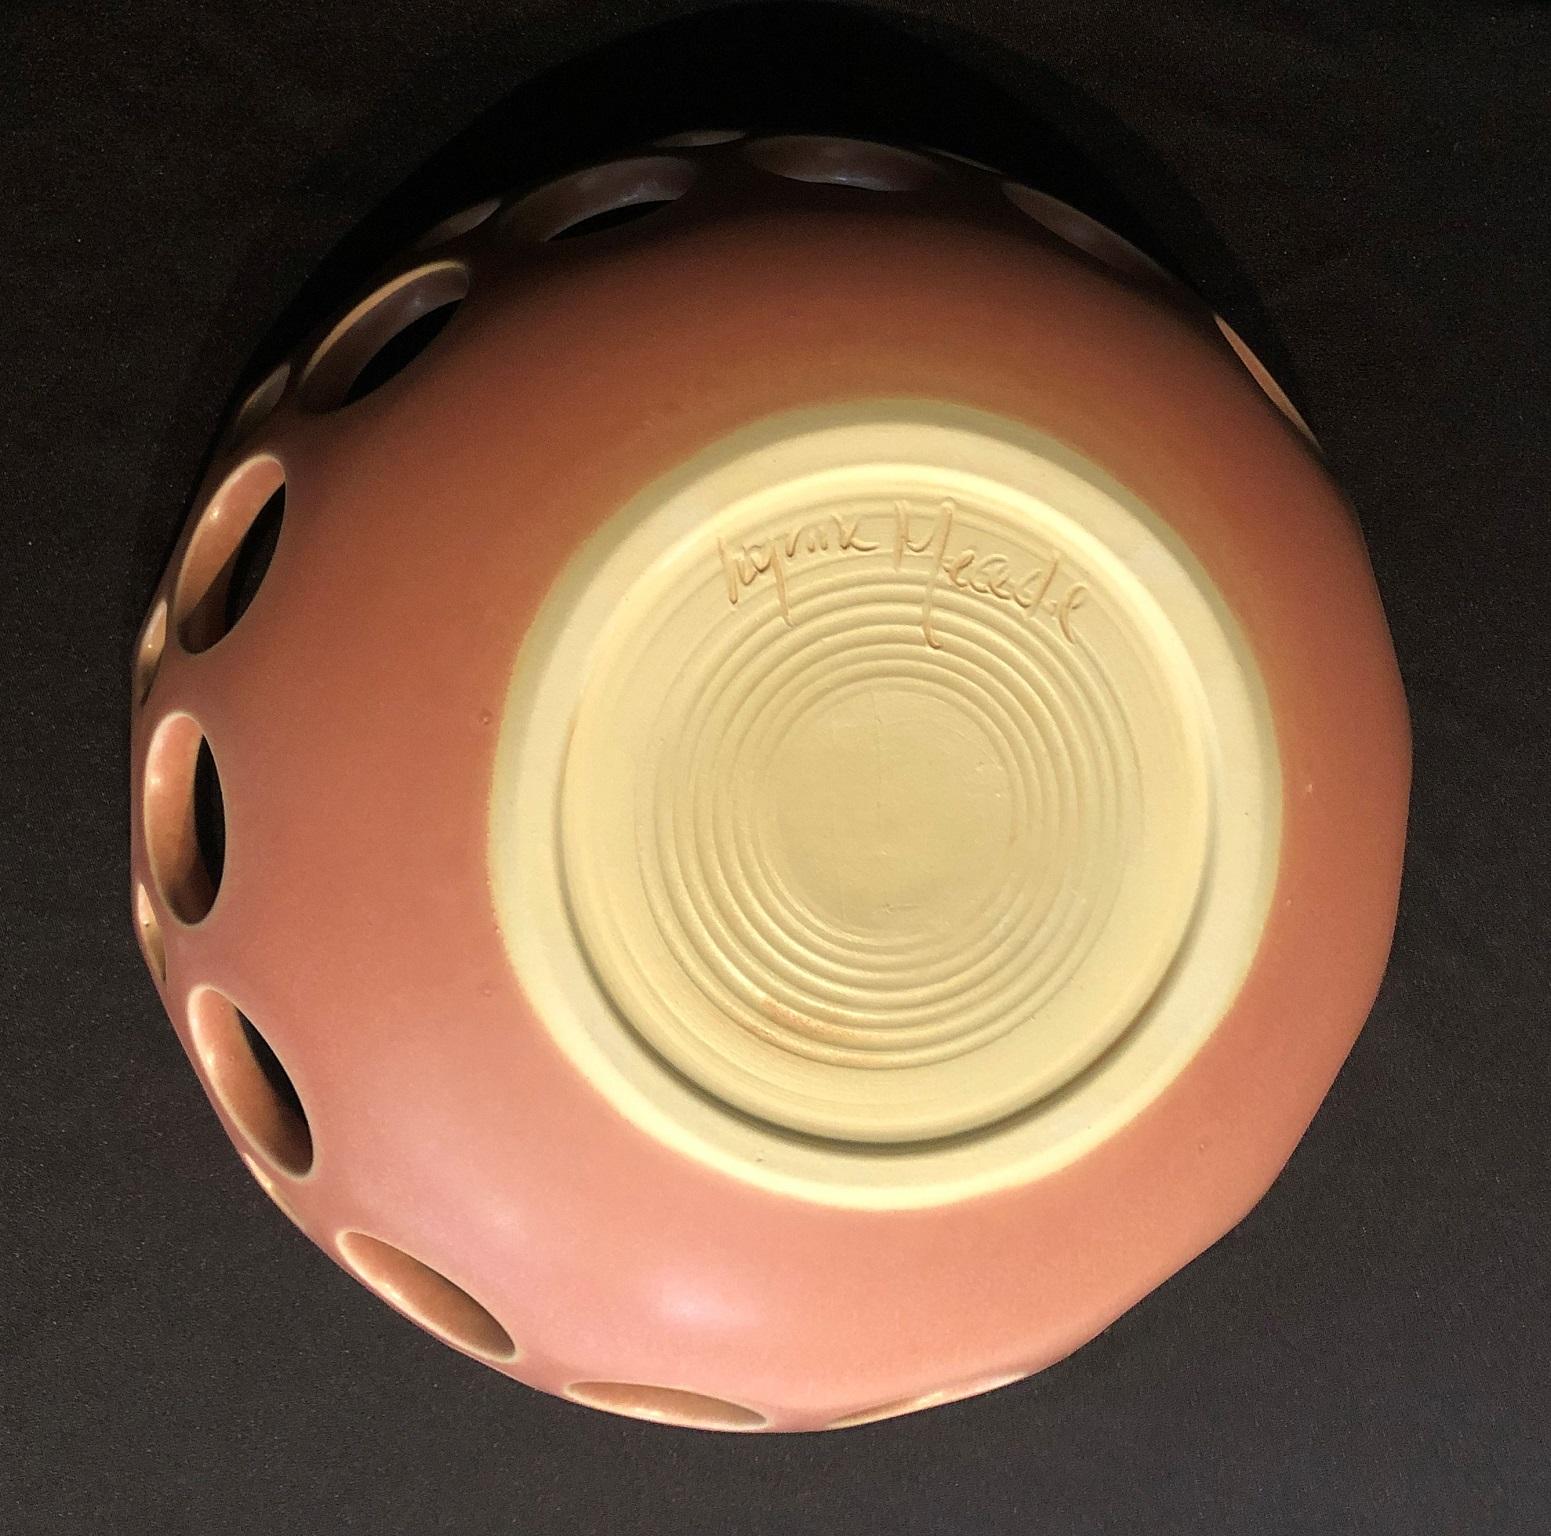 Inspired by Mid-Century Modern design, this bowl is wheel thrown and hand pierced stoneware. The satin glaze varies subtly from rhubabrb to pale pink to eggshell to white. Controlled, slow cooling in the kiln allows tiny crystaline structures to